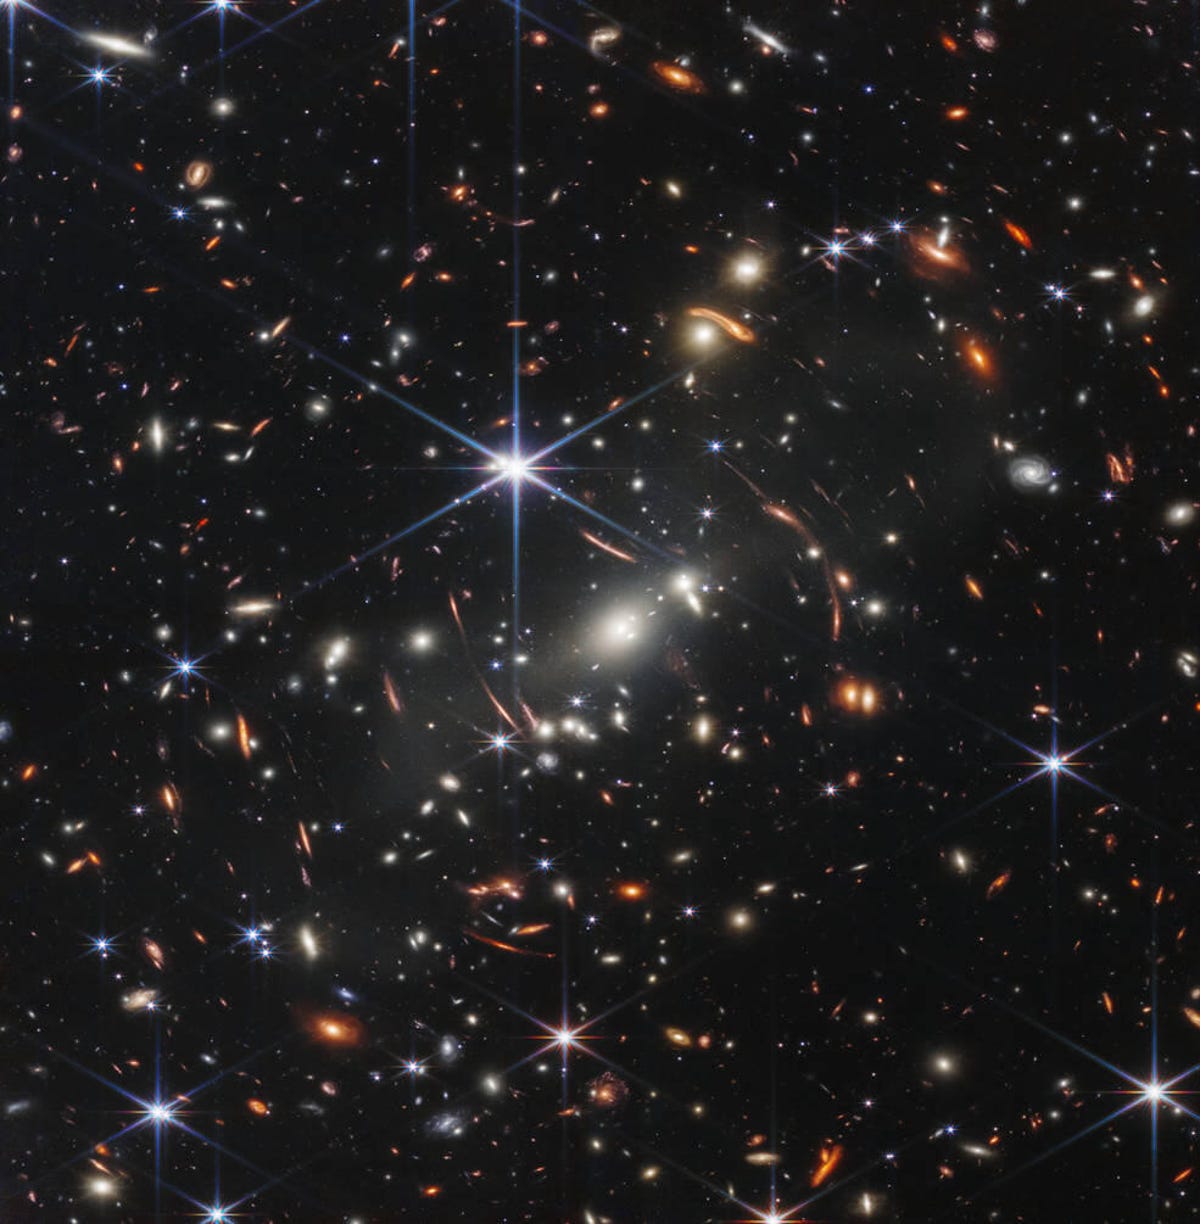 a view of hundreds (perhaps thousands) of galaxies in deep space